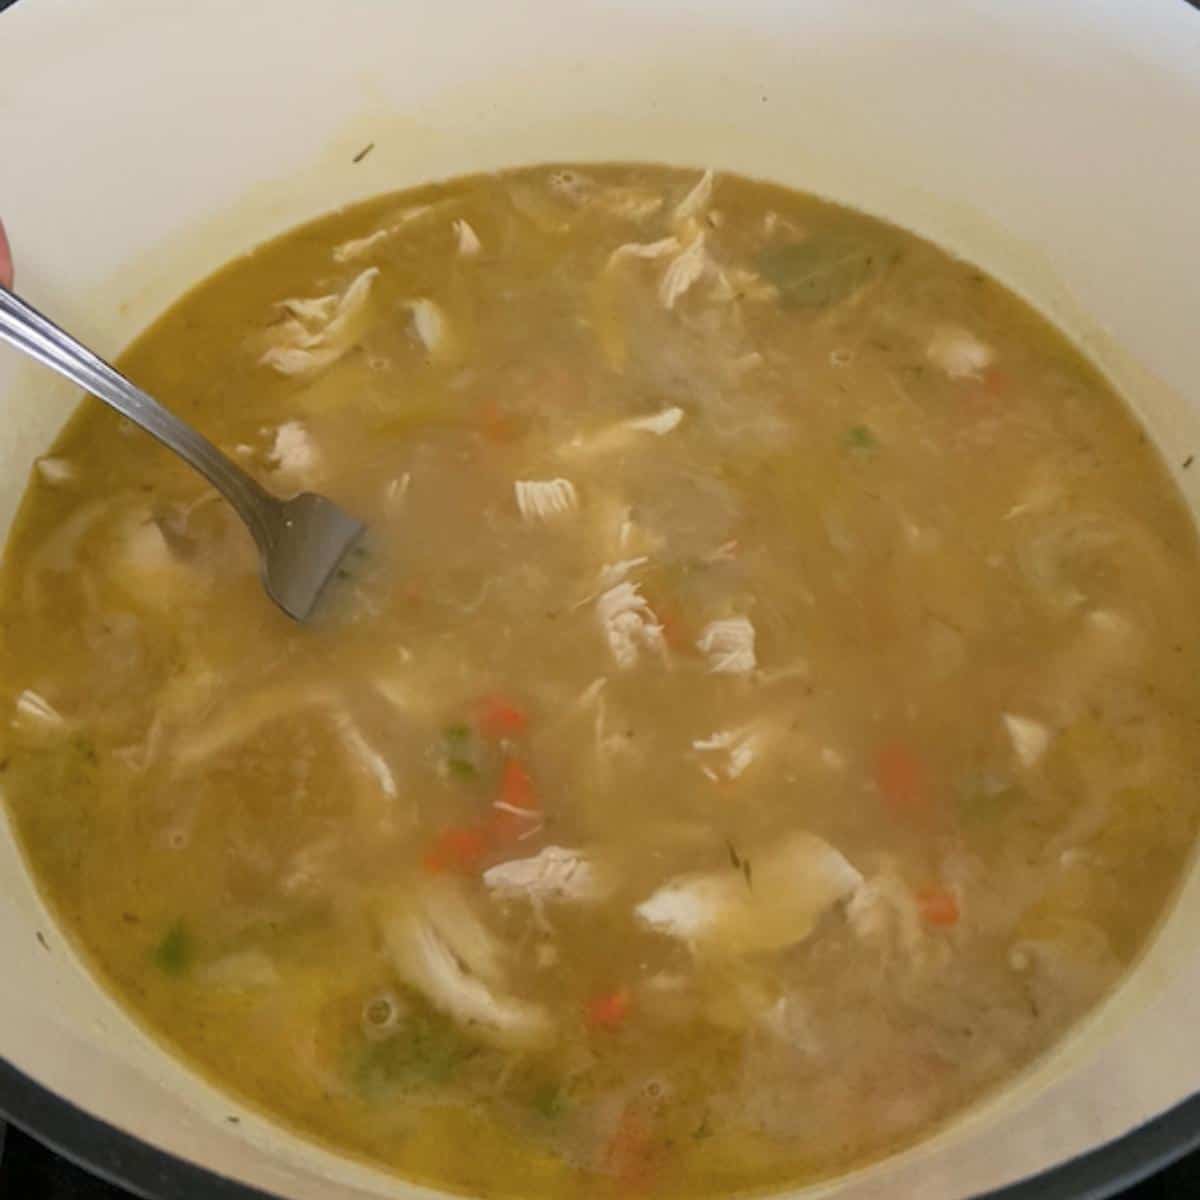 shredded chicken added to soup